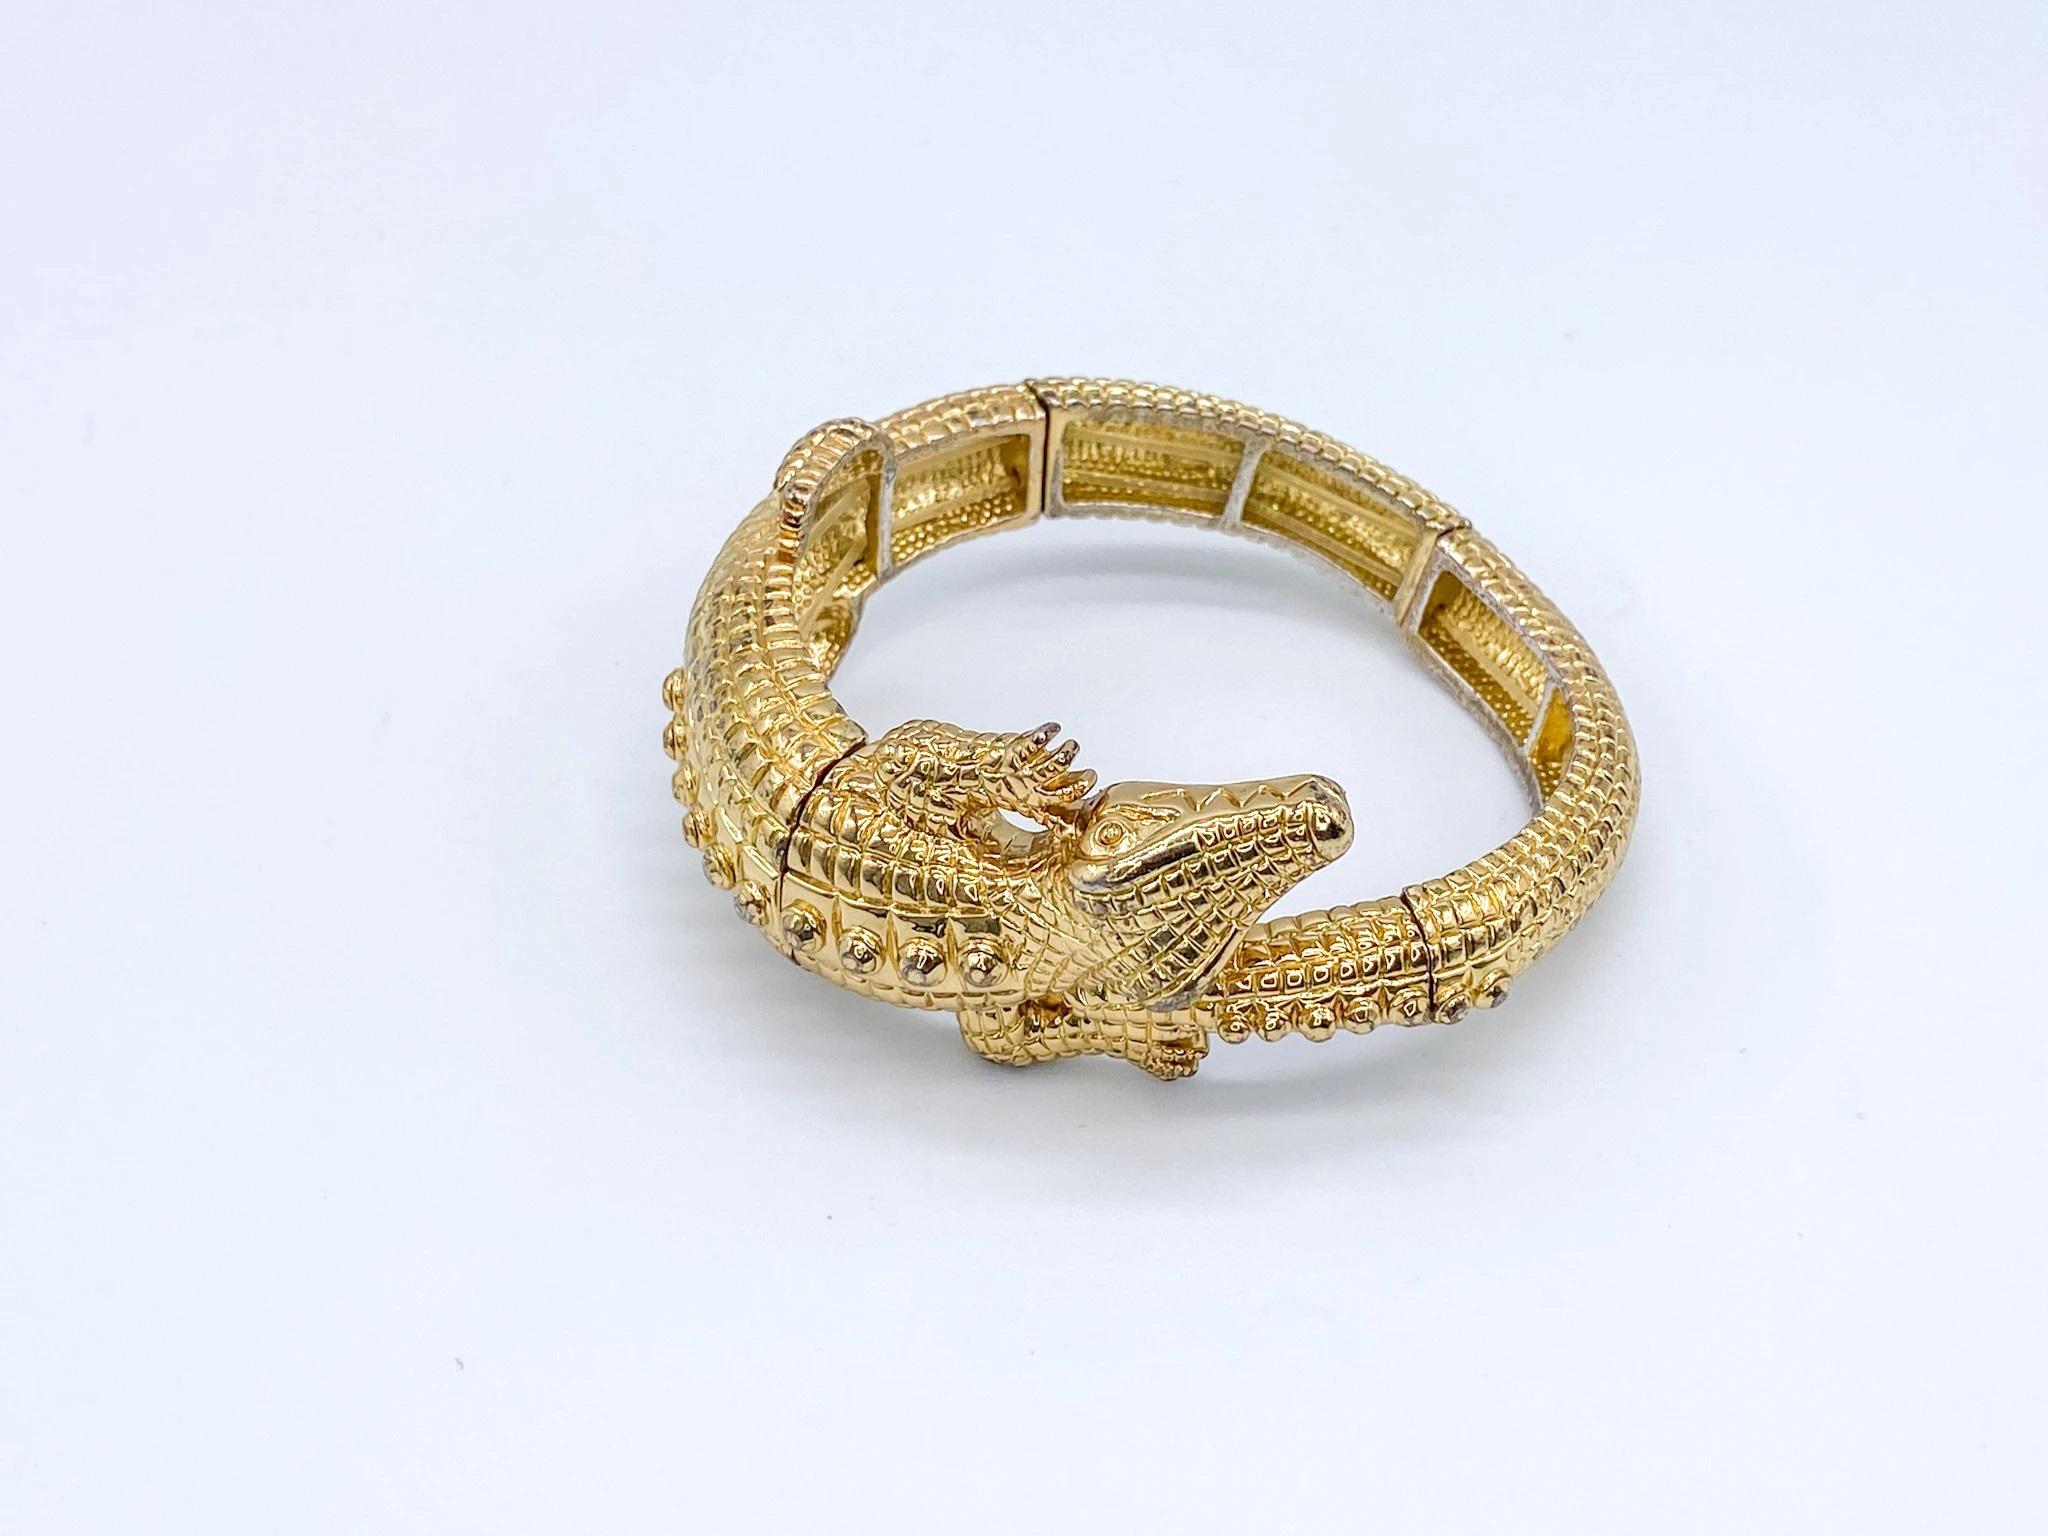 Kenneth Jay Lane 1970s Vintage Aligator bracelet 

-Excellent condition overall. Small amount of storage patina to metal - photos accurately display this.
-Fully authenticated by experts
-Features the KJL 1970s stamp inside